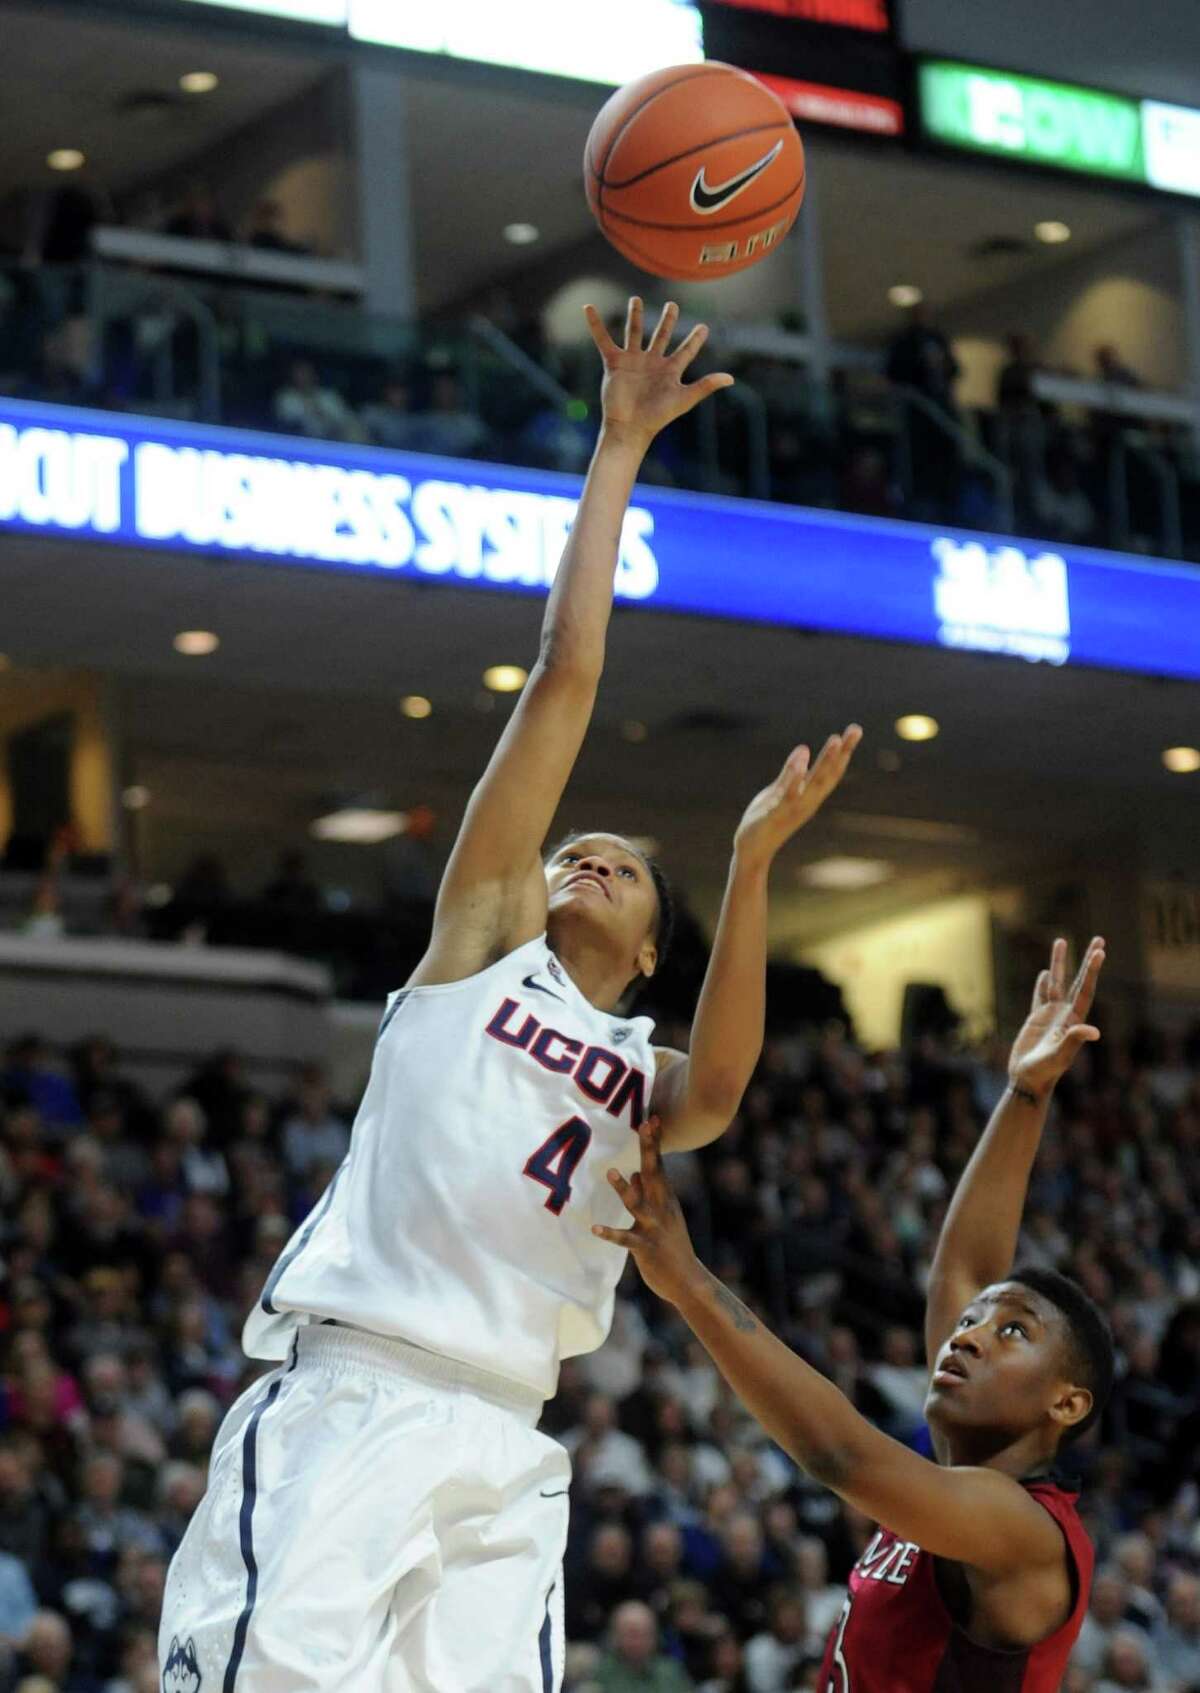 University of Connecticut's Moriah Jefferson goes in for the layup as Temple's Rateska Brown defends during their game Saturday, Jan. 11, 2014 at the Webster Bank Arena in Bridgeport, Conn.